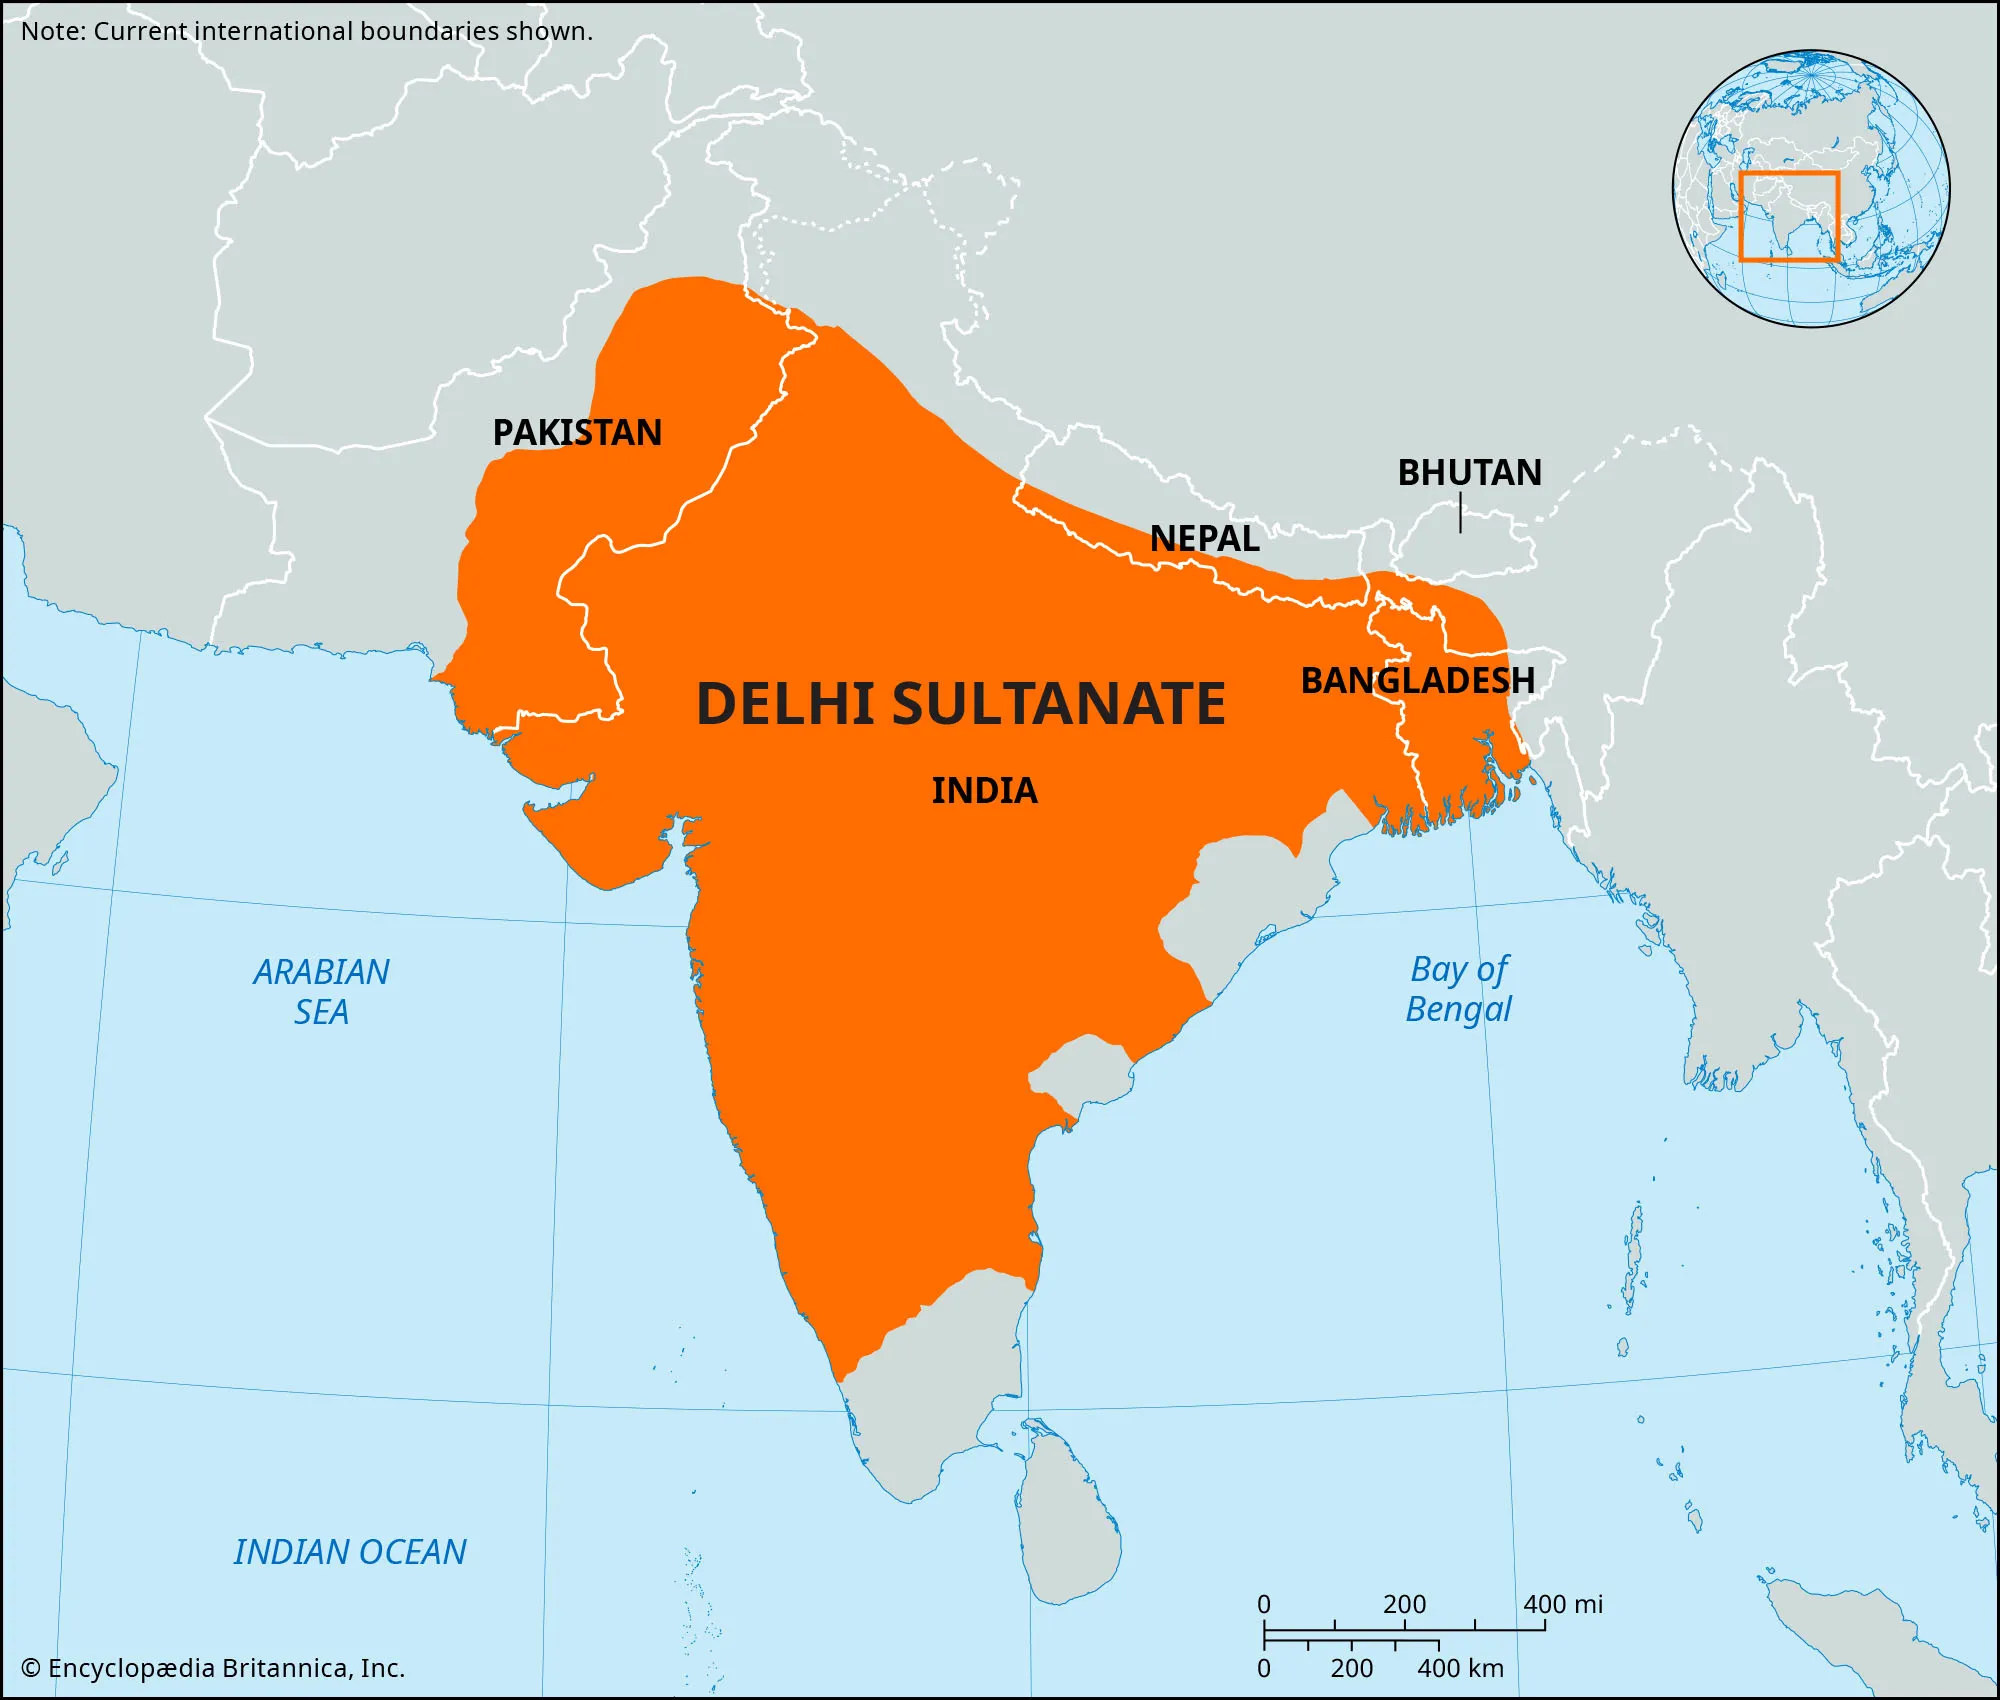 <p>they took a more sytematic campaign to rule india and established the sultanate of dehli which was an islamic state and ruled that for over 200 years. however they faced a lot of resistance by teh hindu population having many dehli leaders assasinated</p>